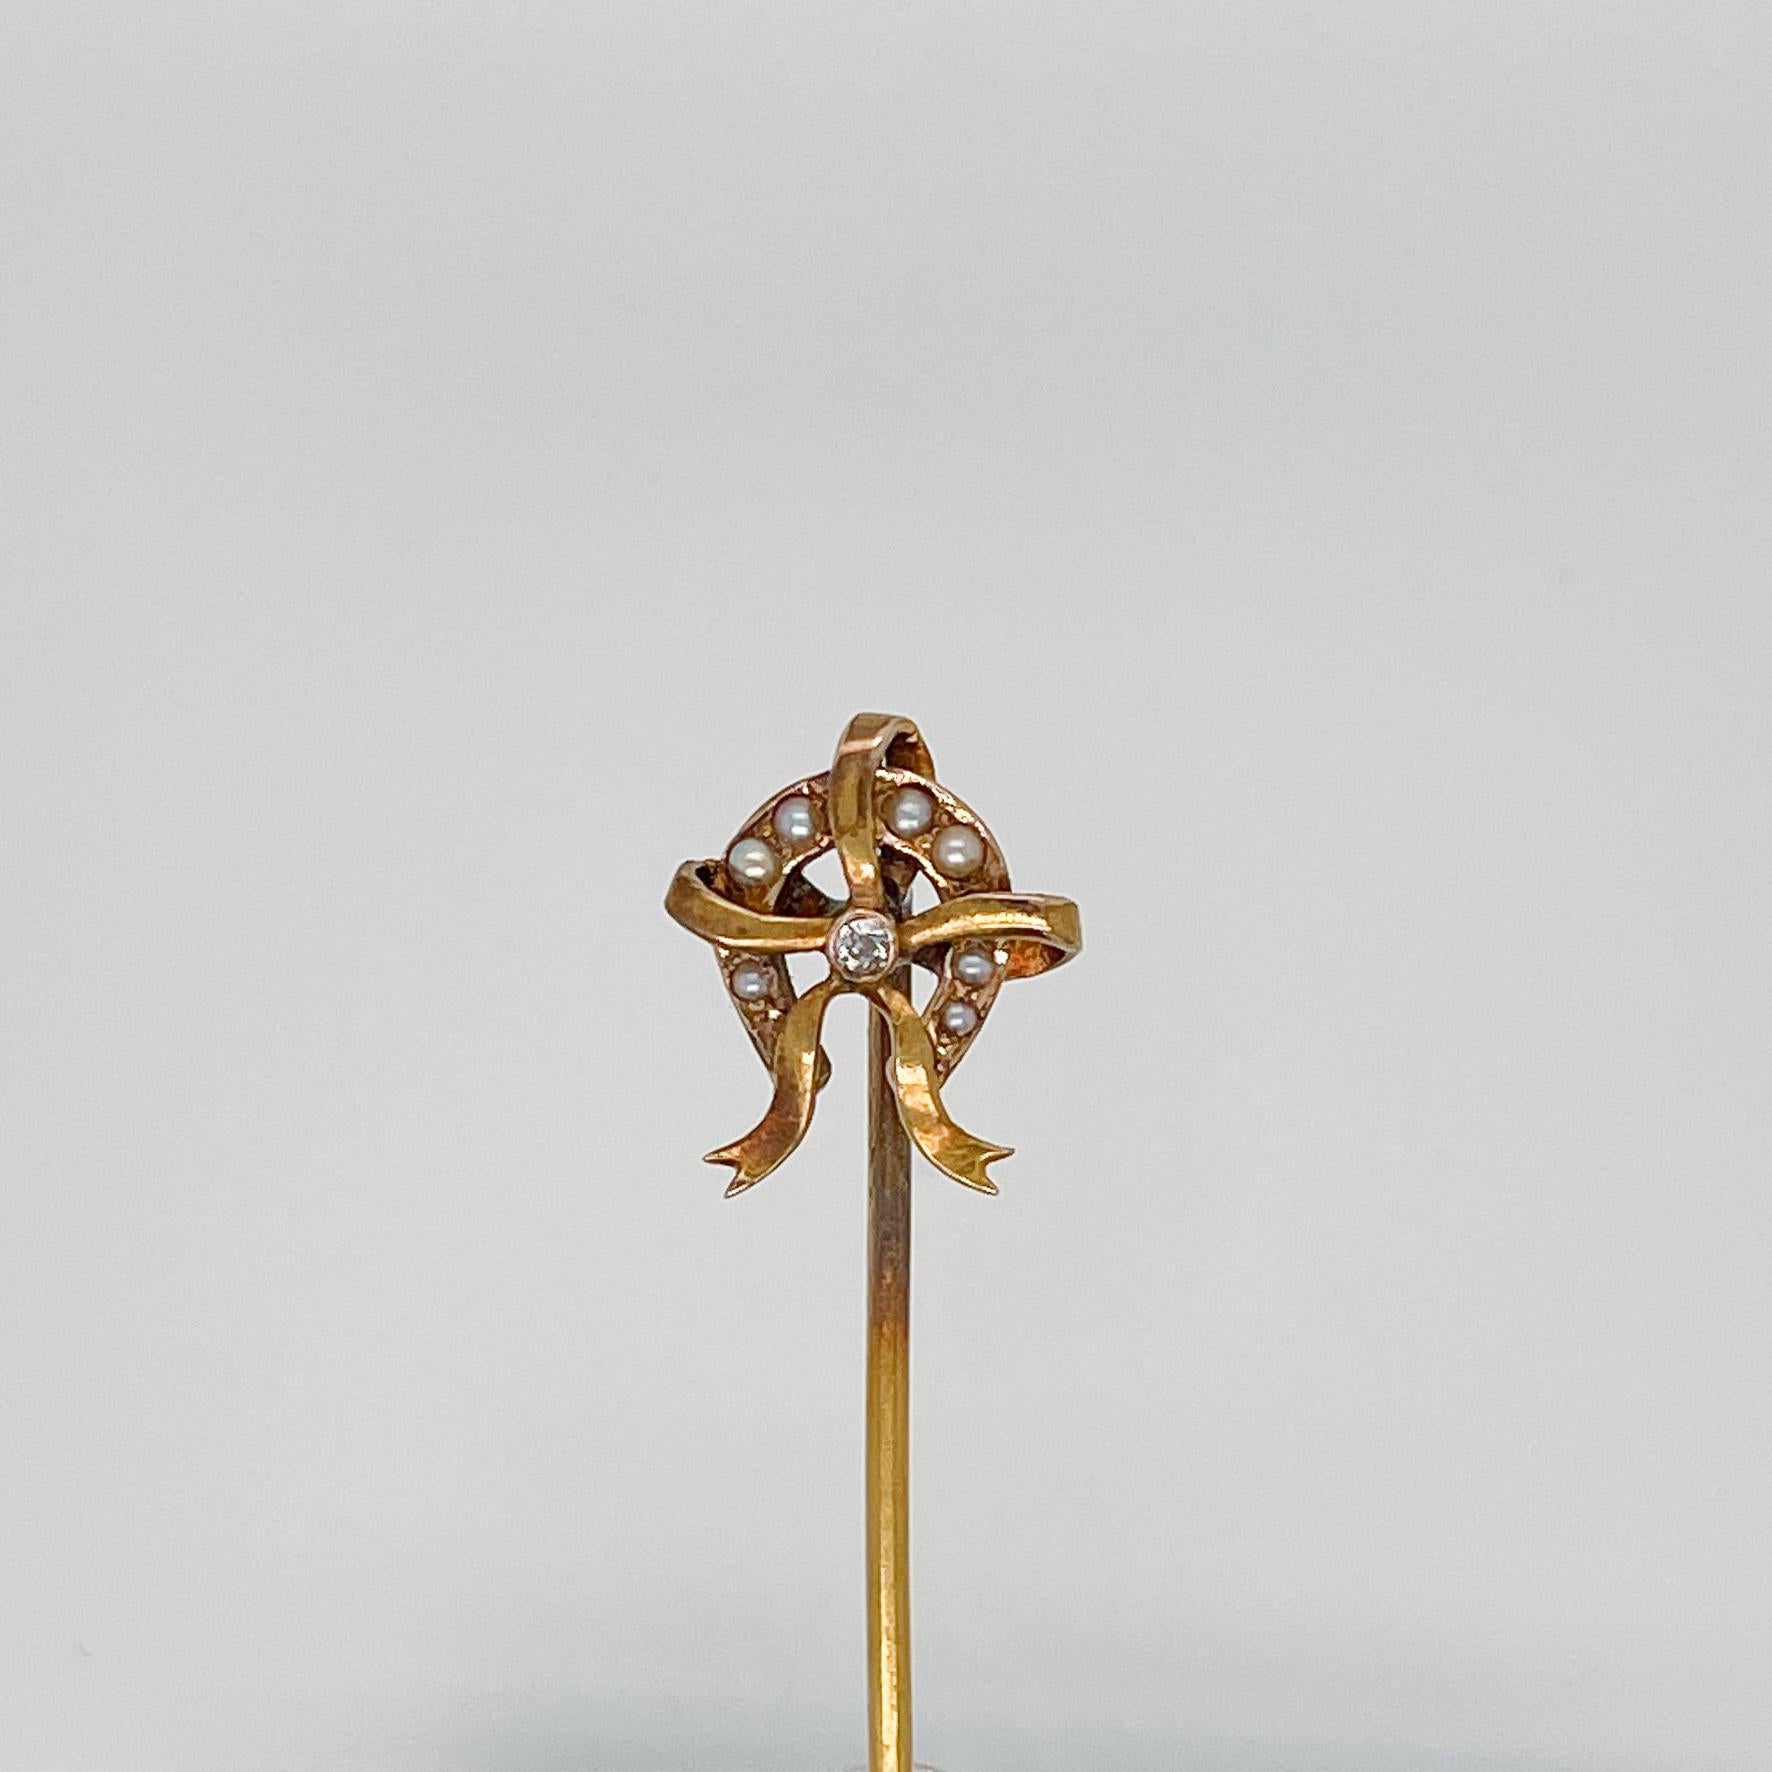 A very fine 14k yellow gold horseshoe & ribbon stickpin.

With small seed pearls pave set in the horseshoe and with a small round brilliant diamond flush set at the center of the ribbon.

Simply a great stickpin!

Date:
19th Century or Early 20th